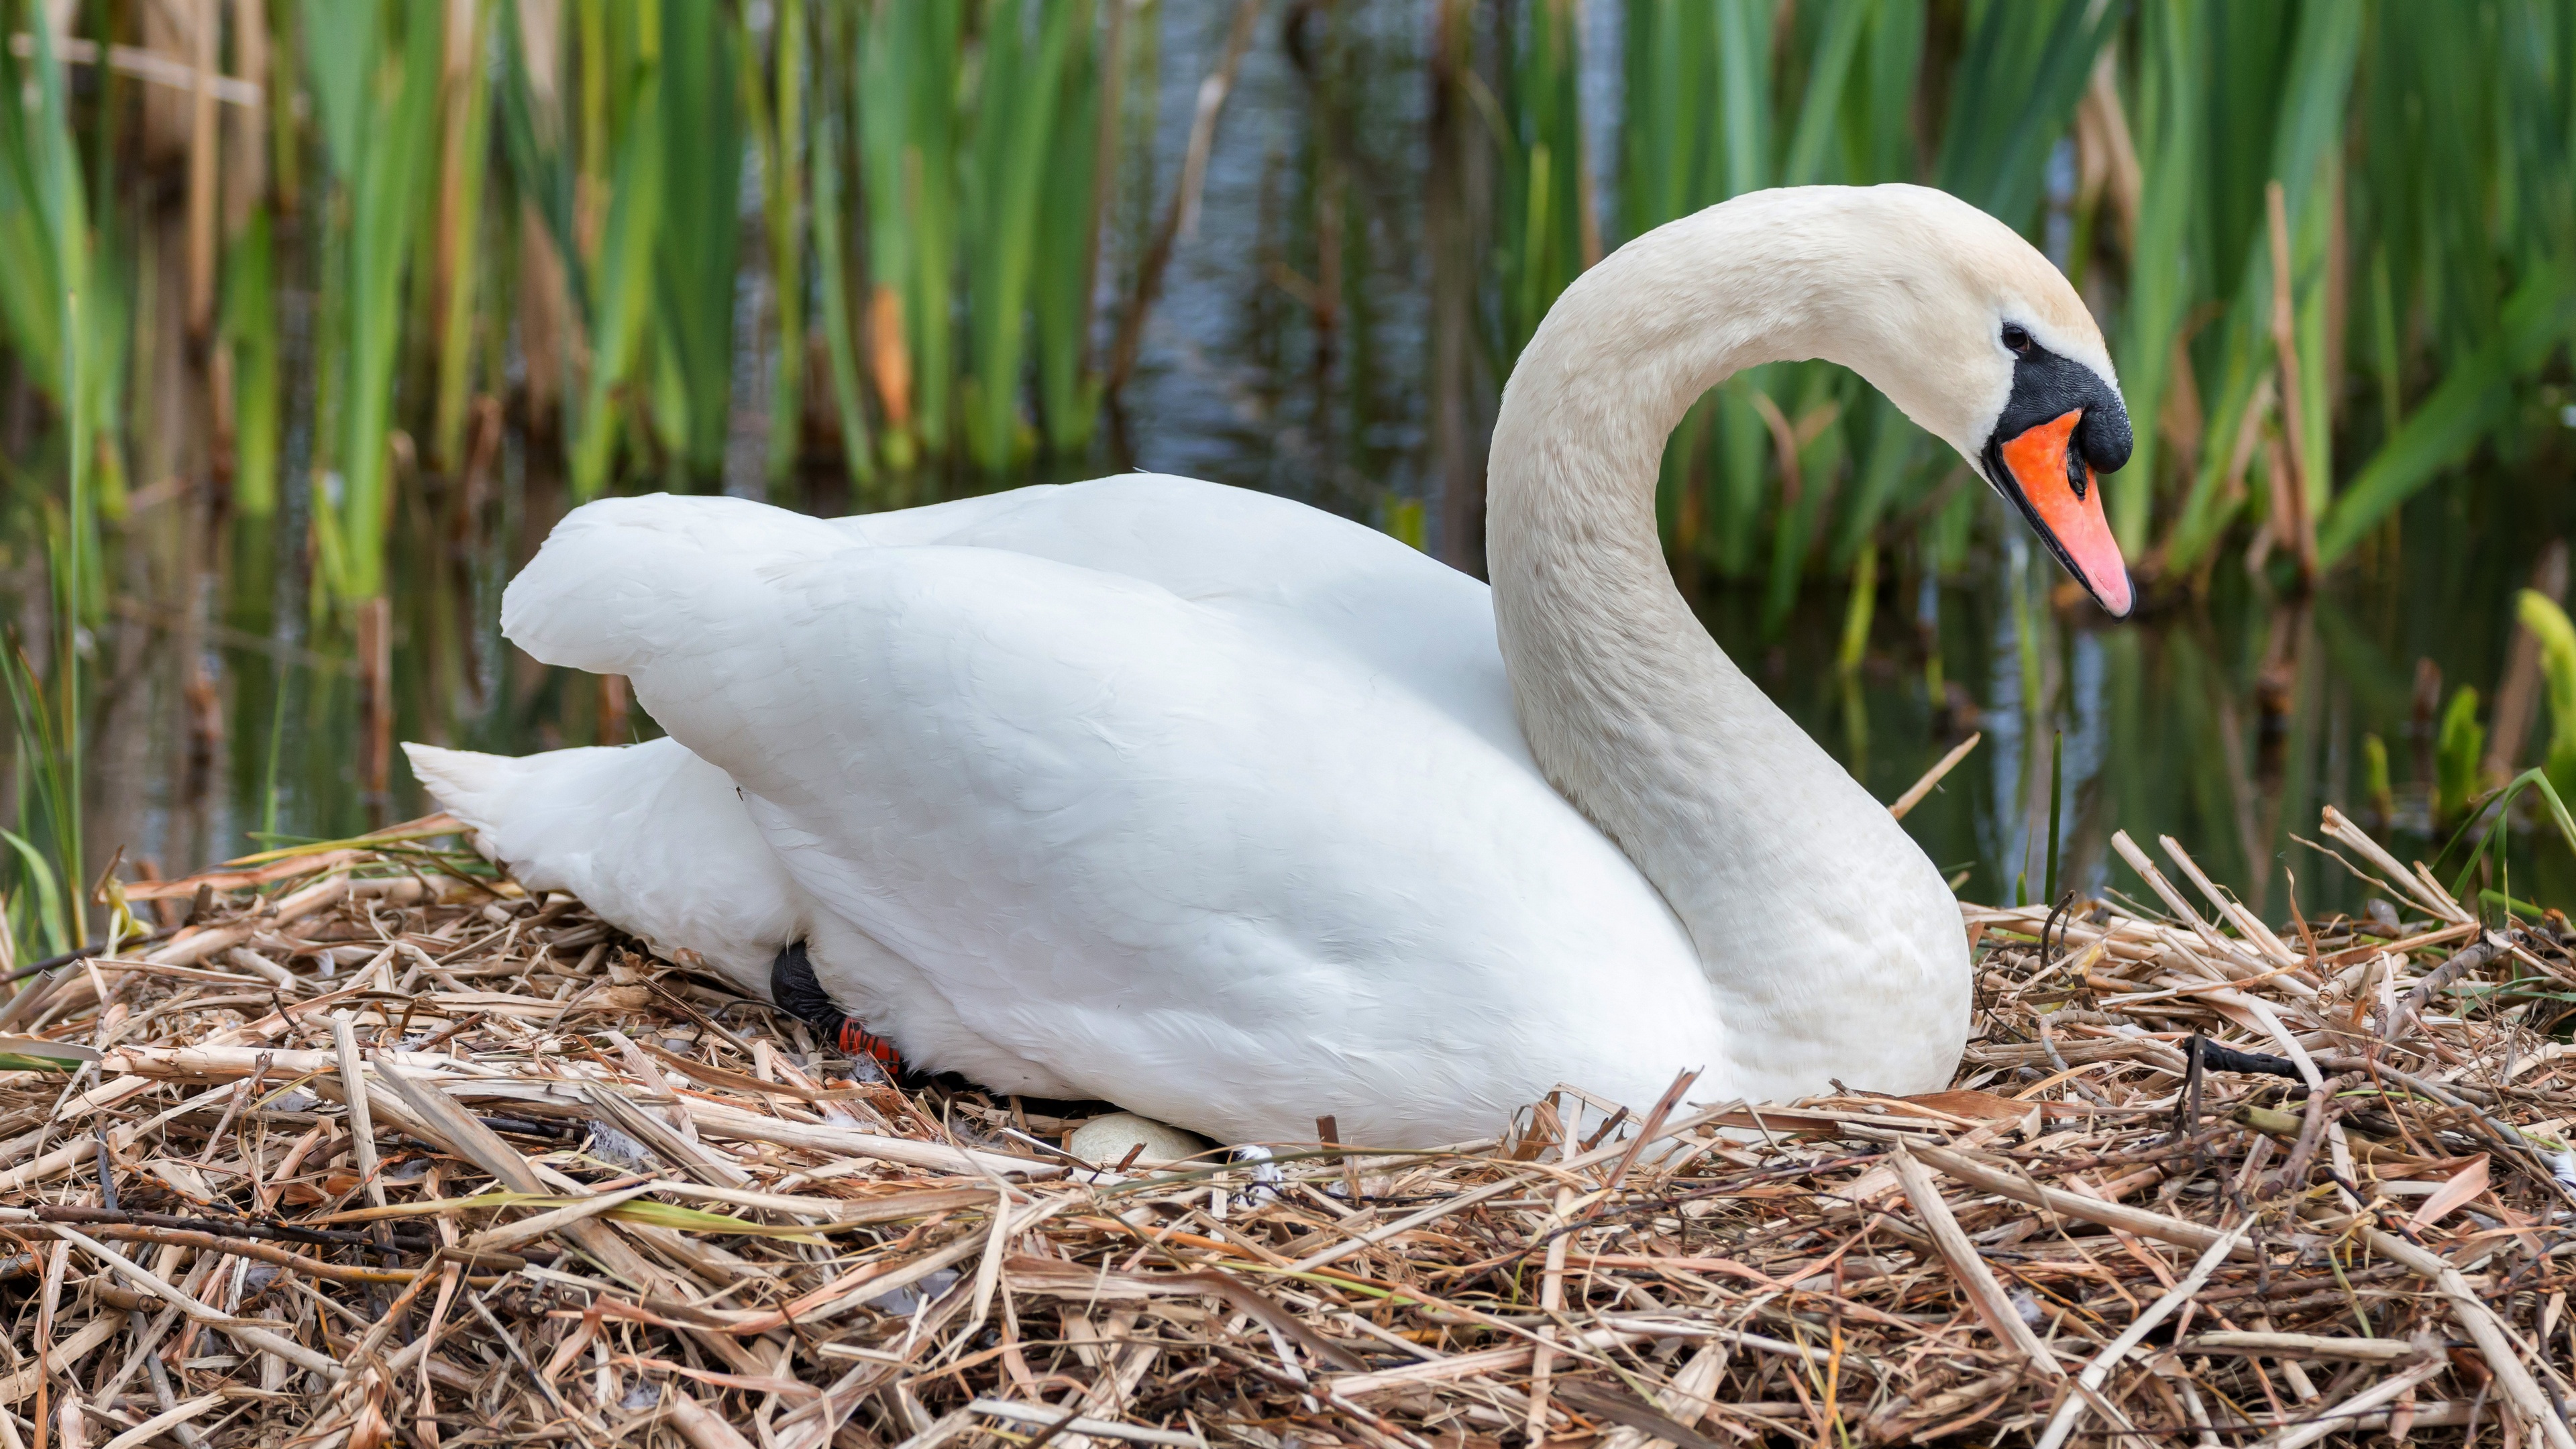 A white swan sits in a nest